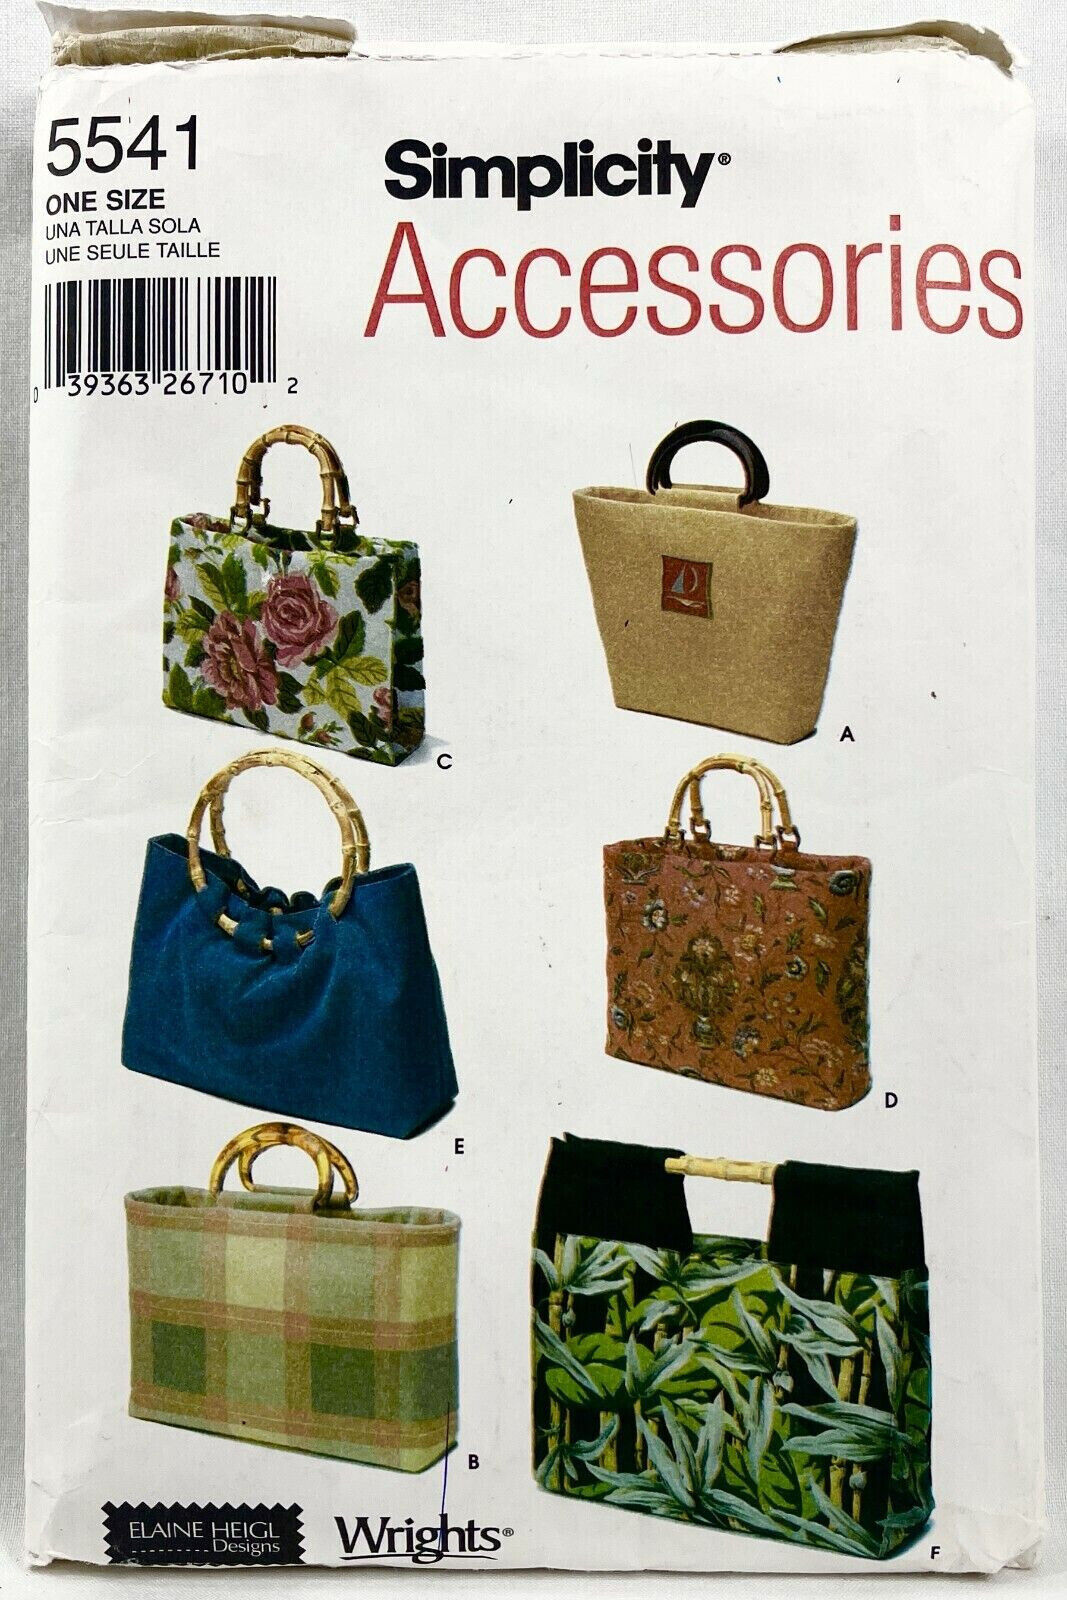 2003 Simplicity Sewing Pattern 5541 Womens Handbags 6 Styles Accessories 11318